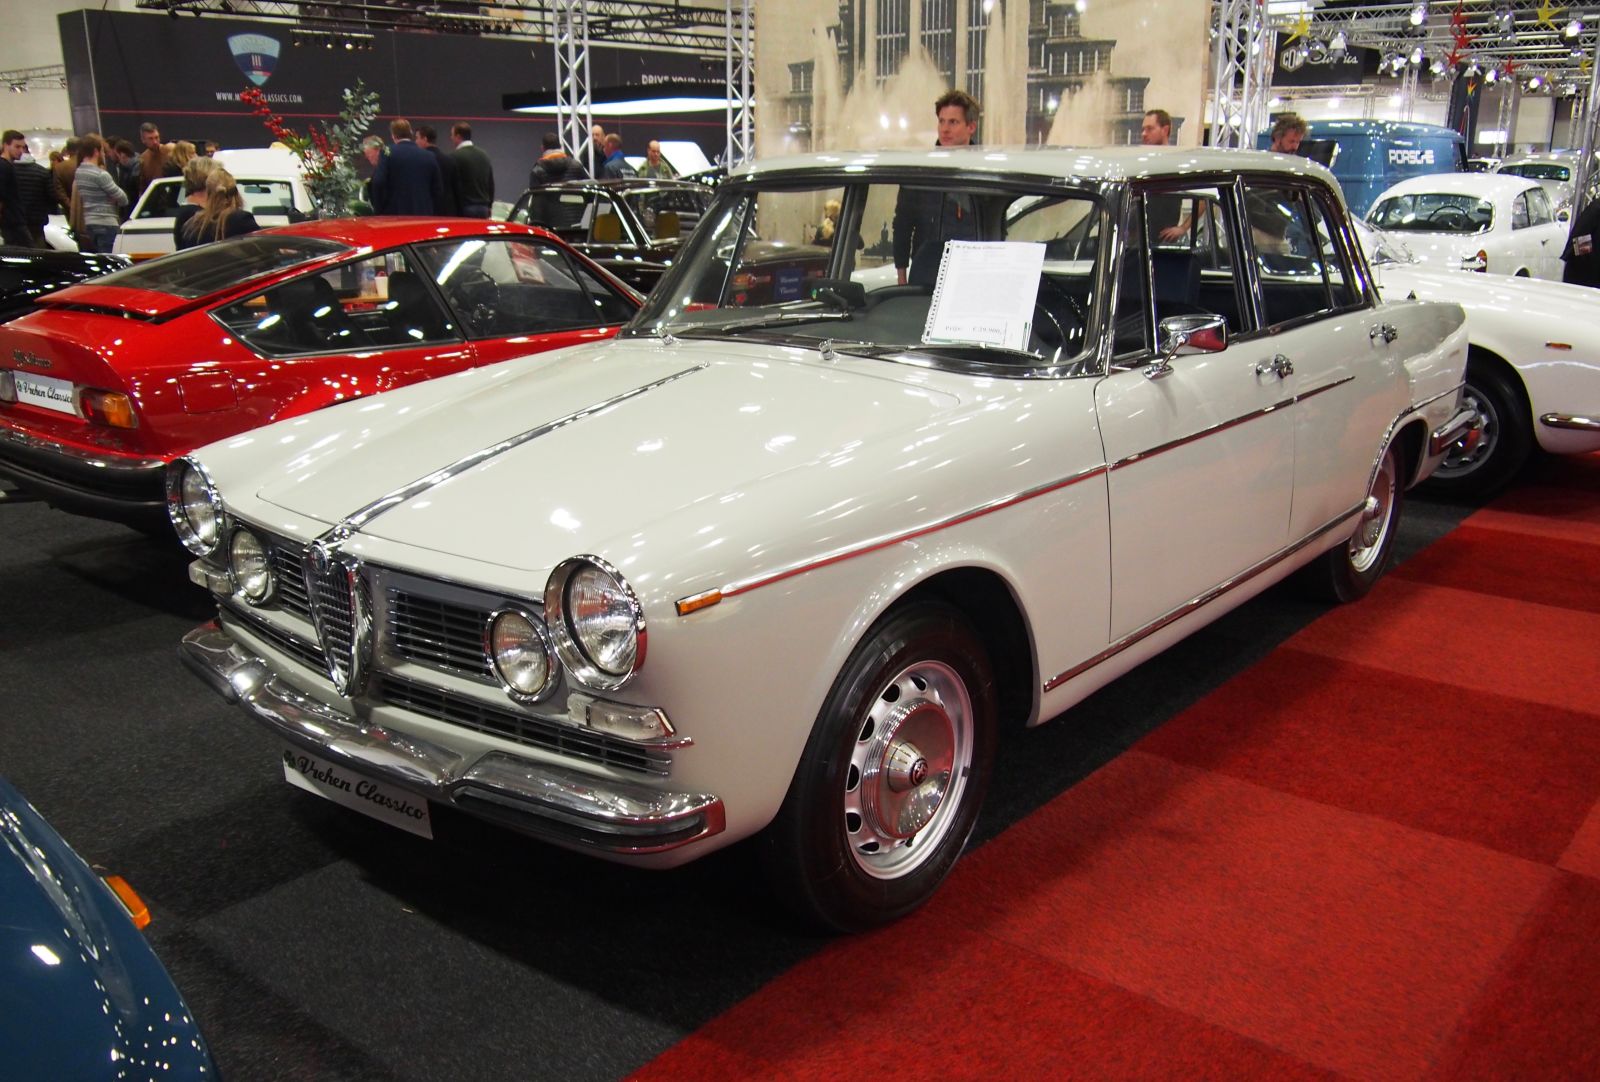 This is a 2600 Berlina from 1962, one of Alfa’s oft forgotten “big” saloons.